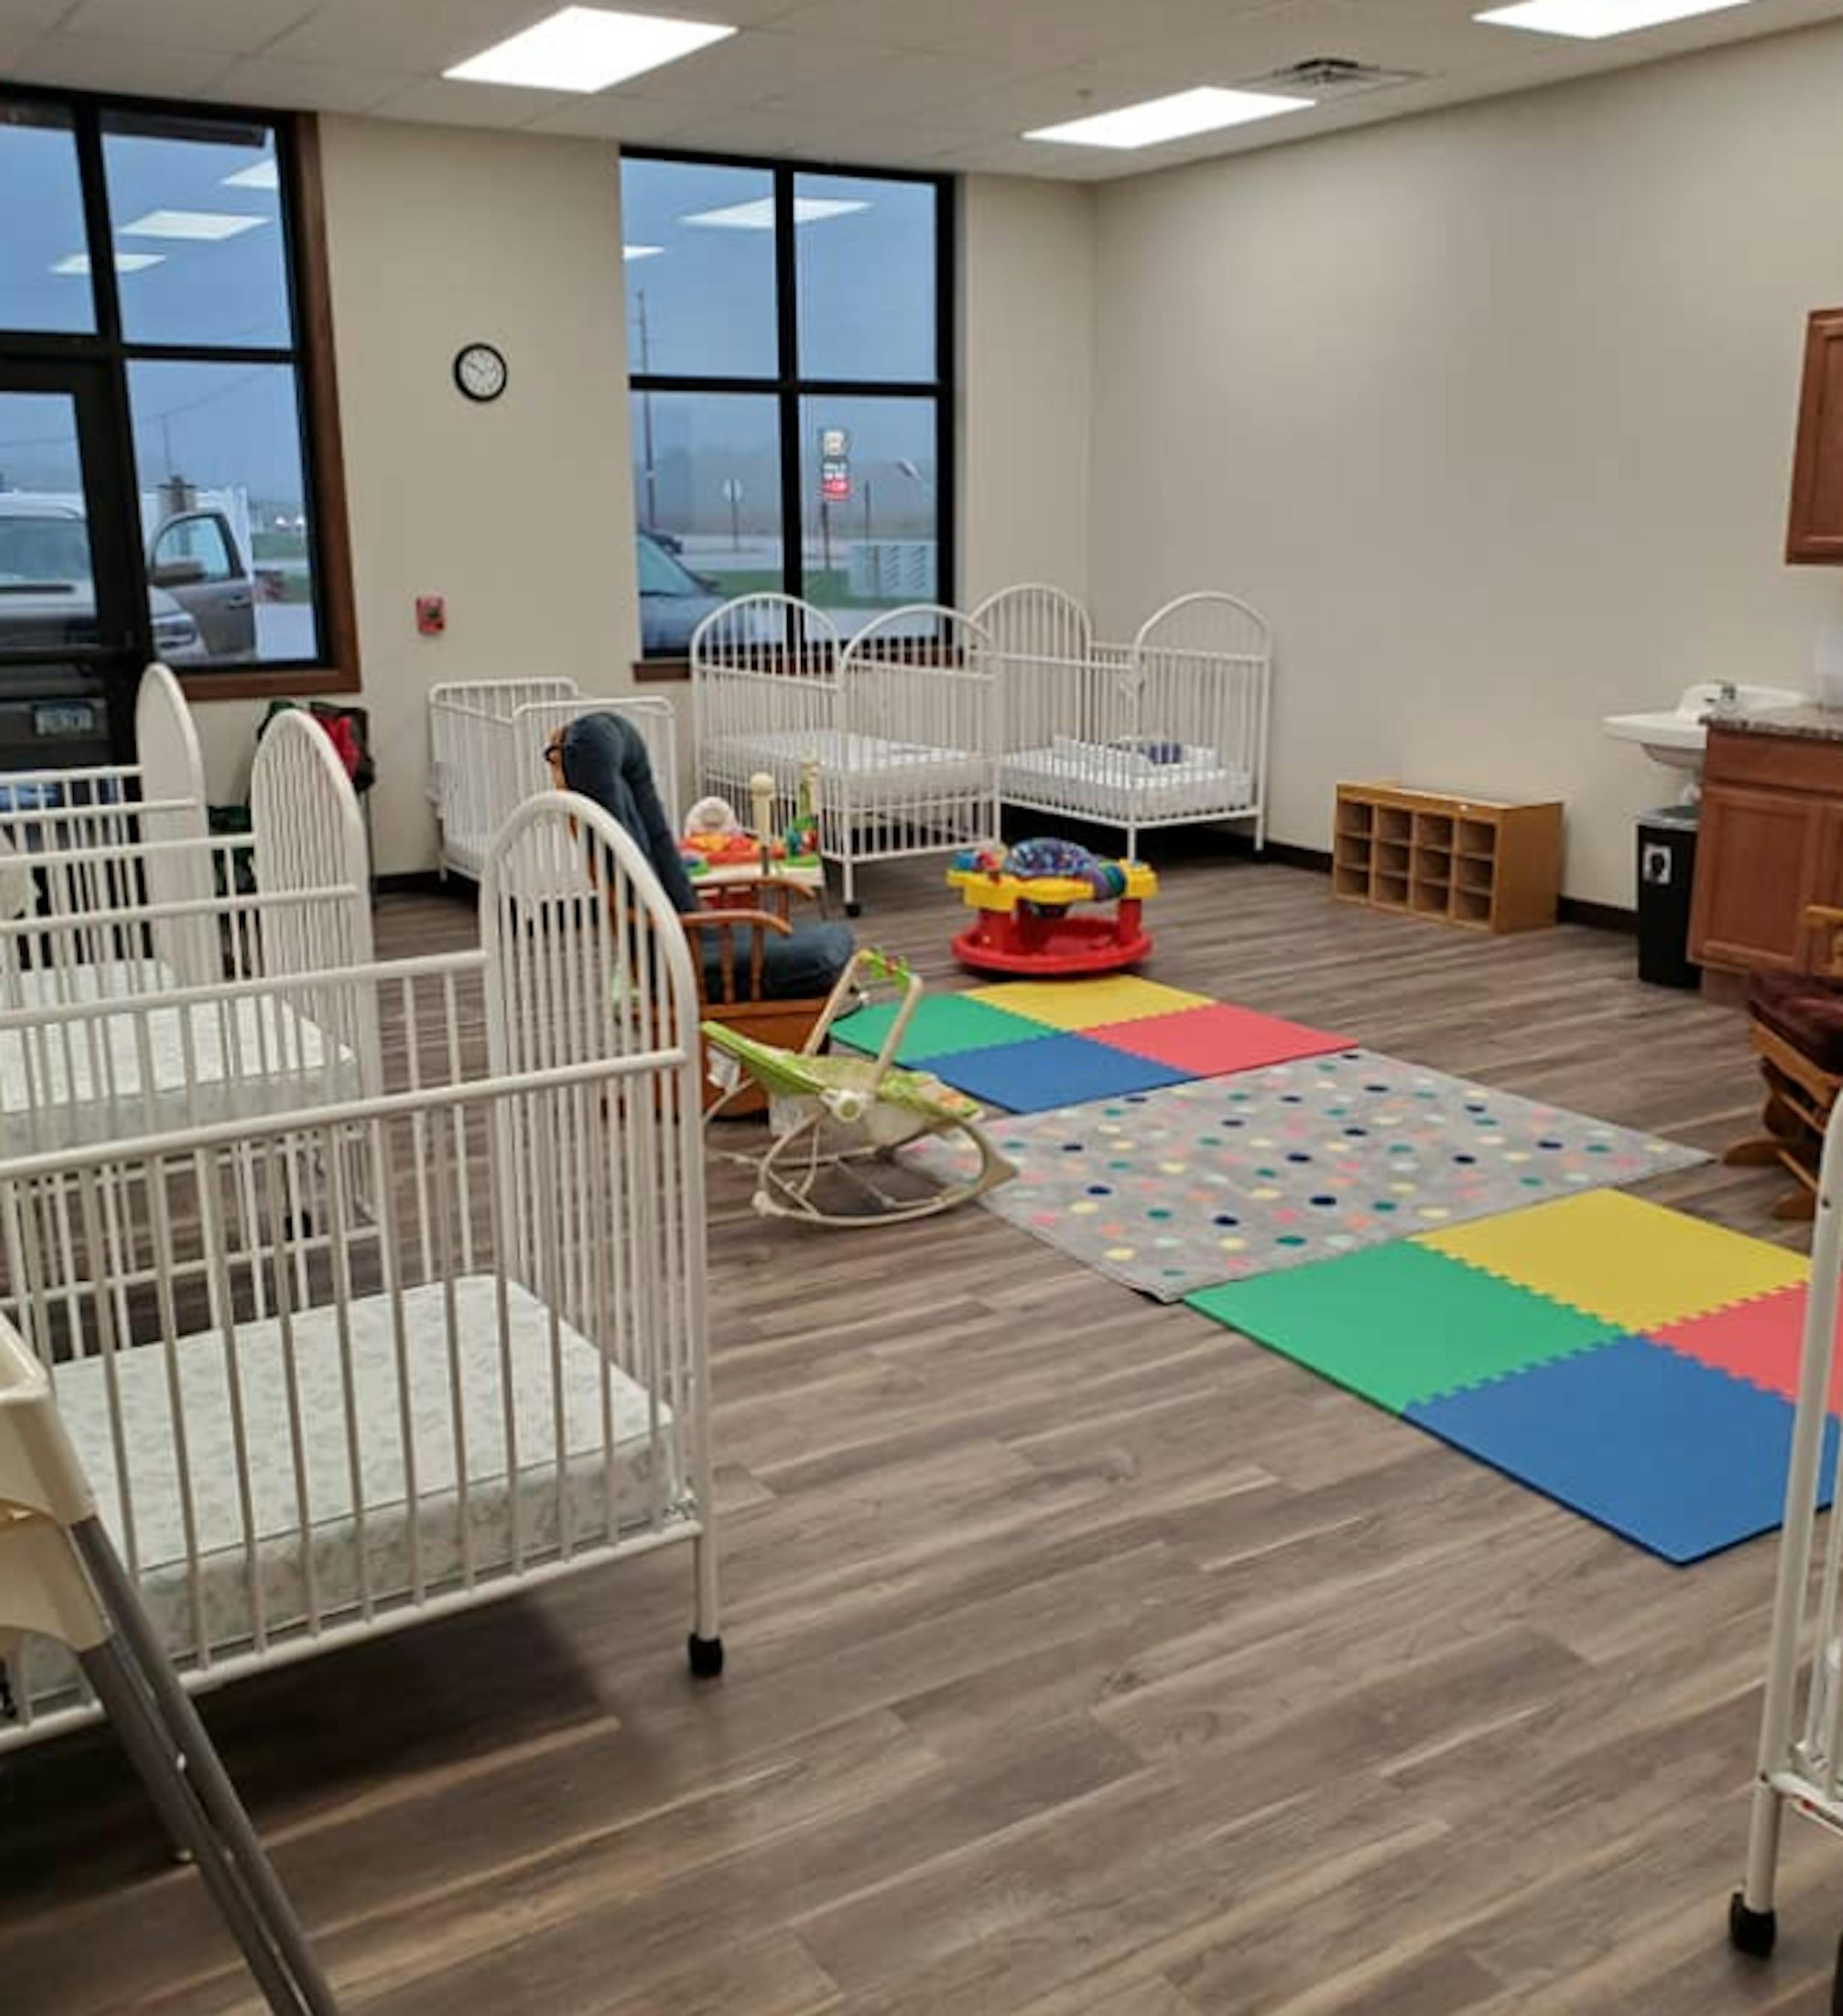 The OBPA in Ogdensburg is planning a 15,000 sq foot child care center